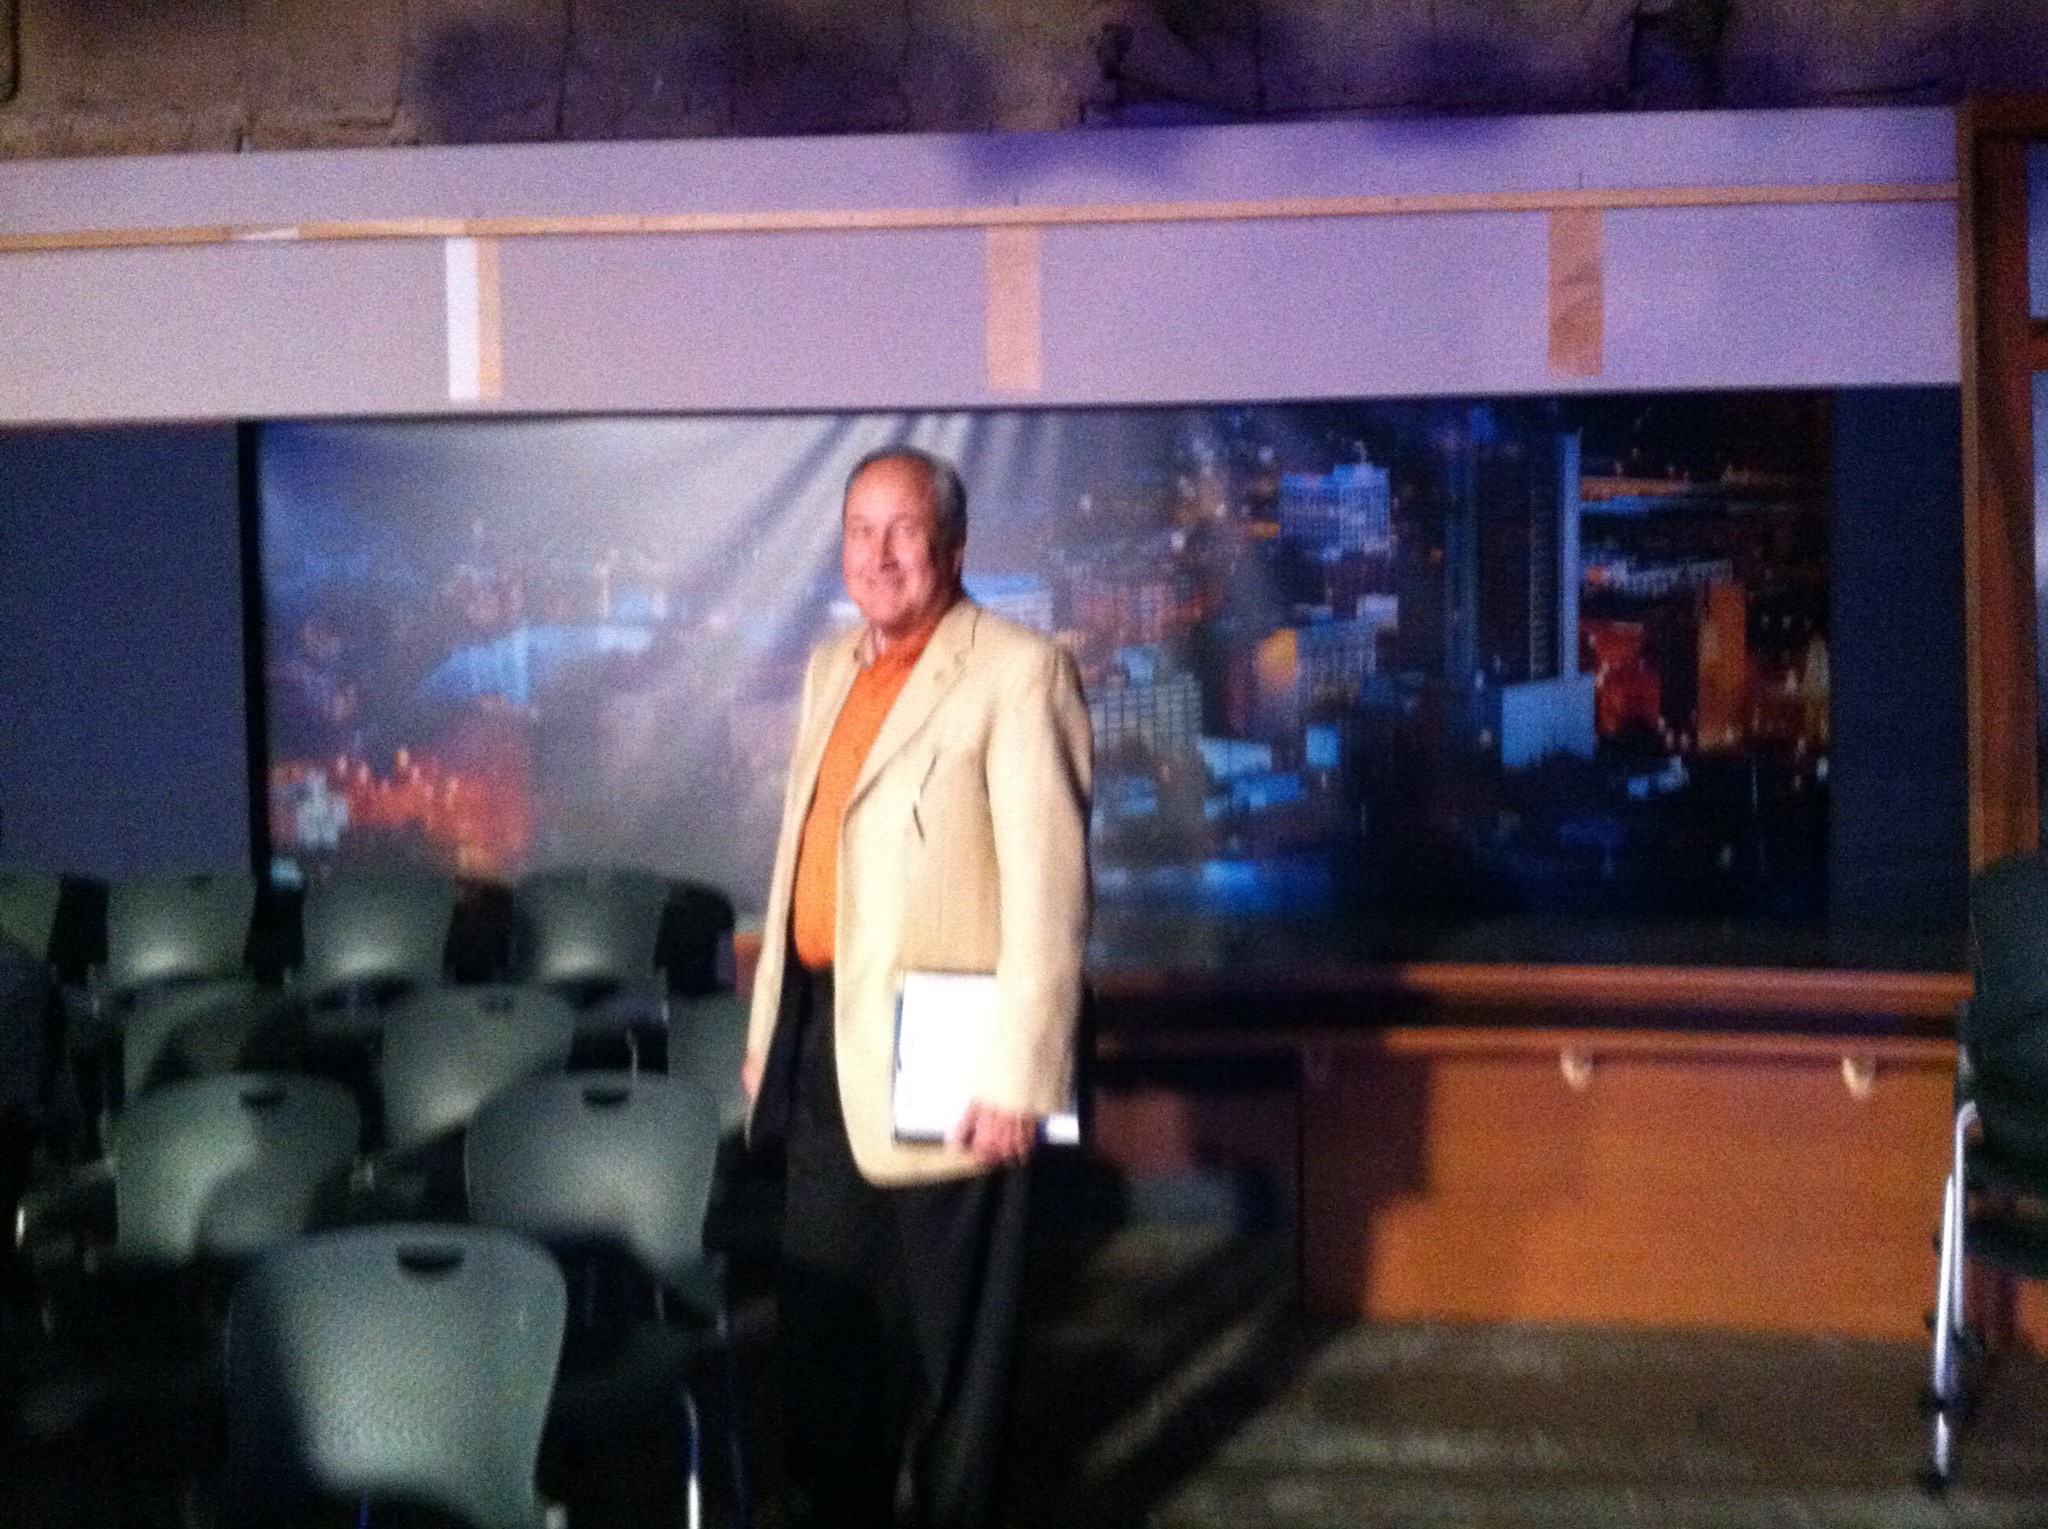 Mike Wargo on the set of Michiana's Rising Star.